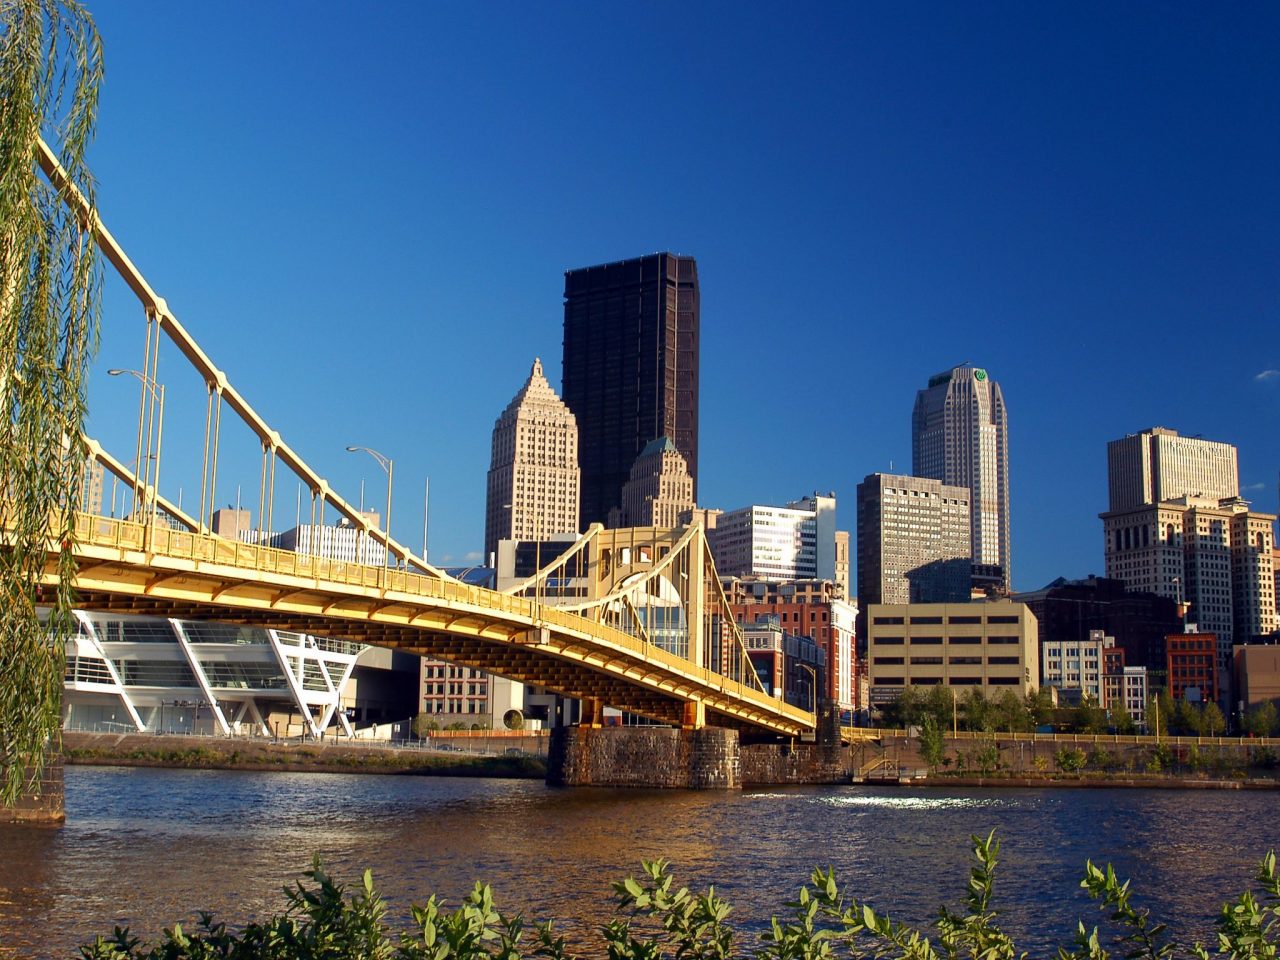 allegheny river with the skyline of downtown pittsburgh